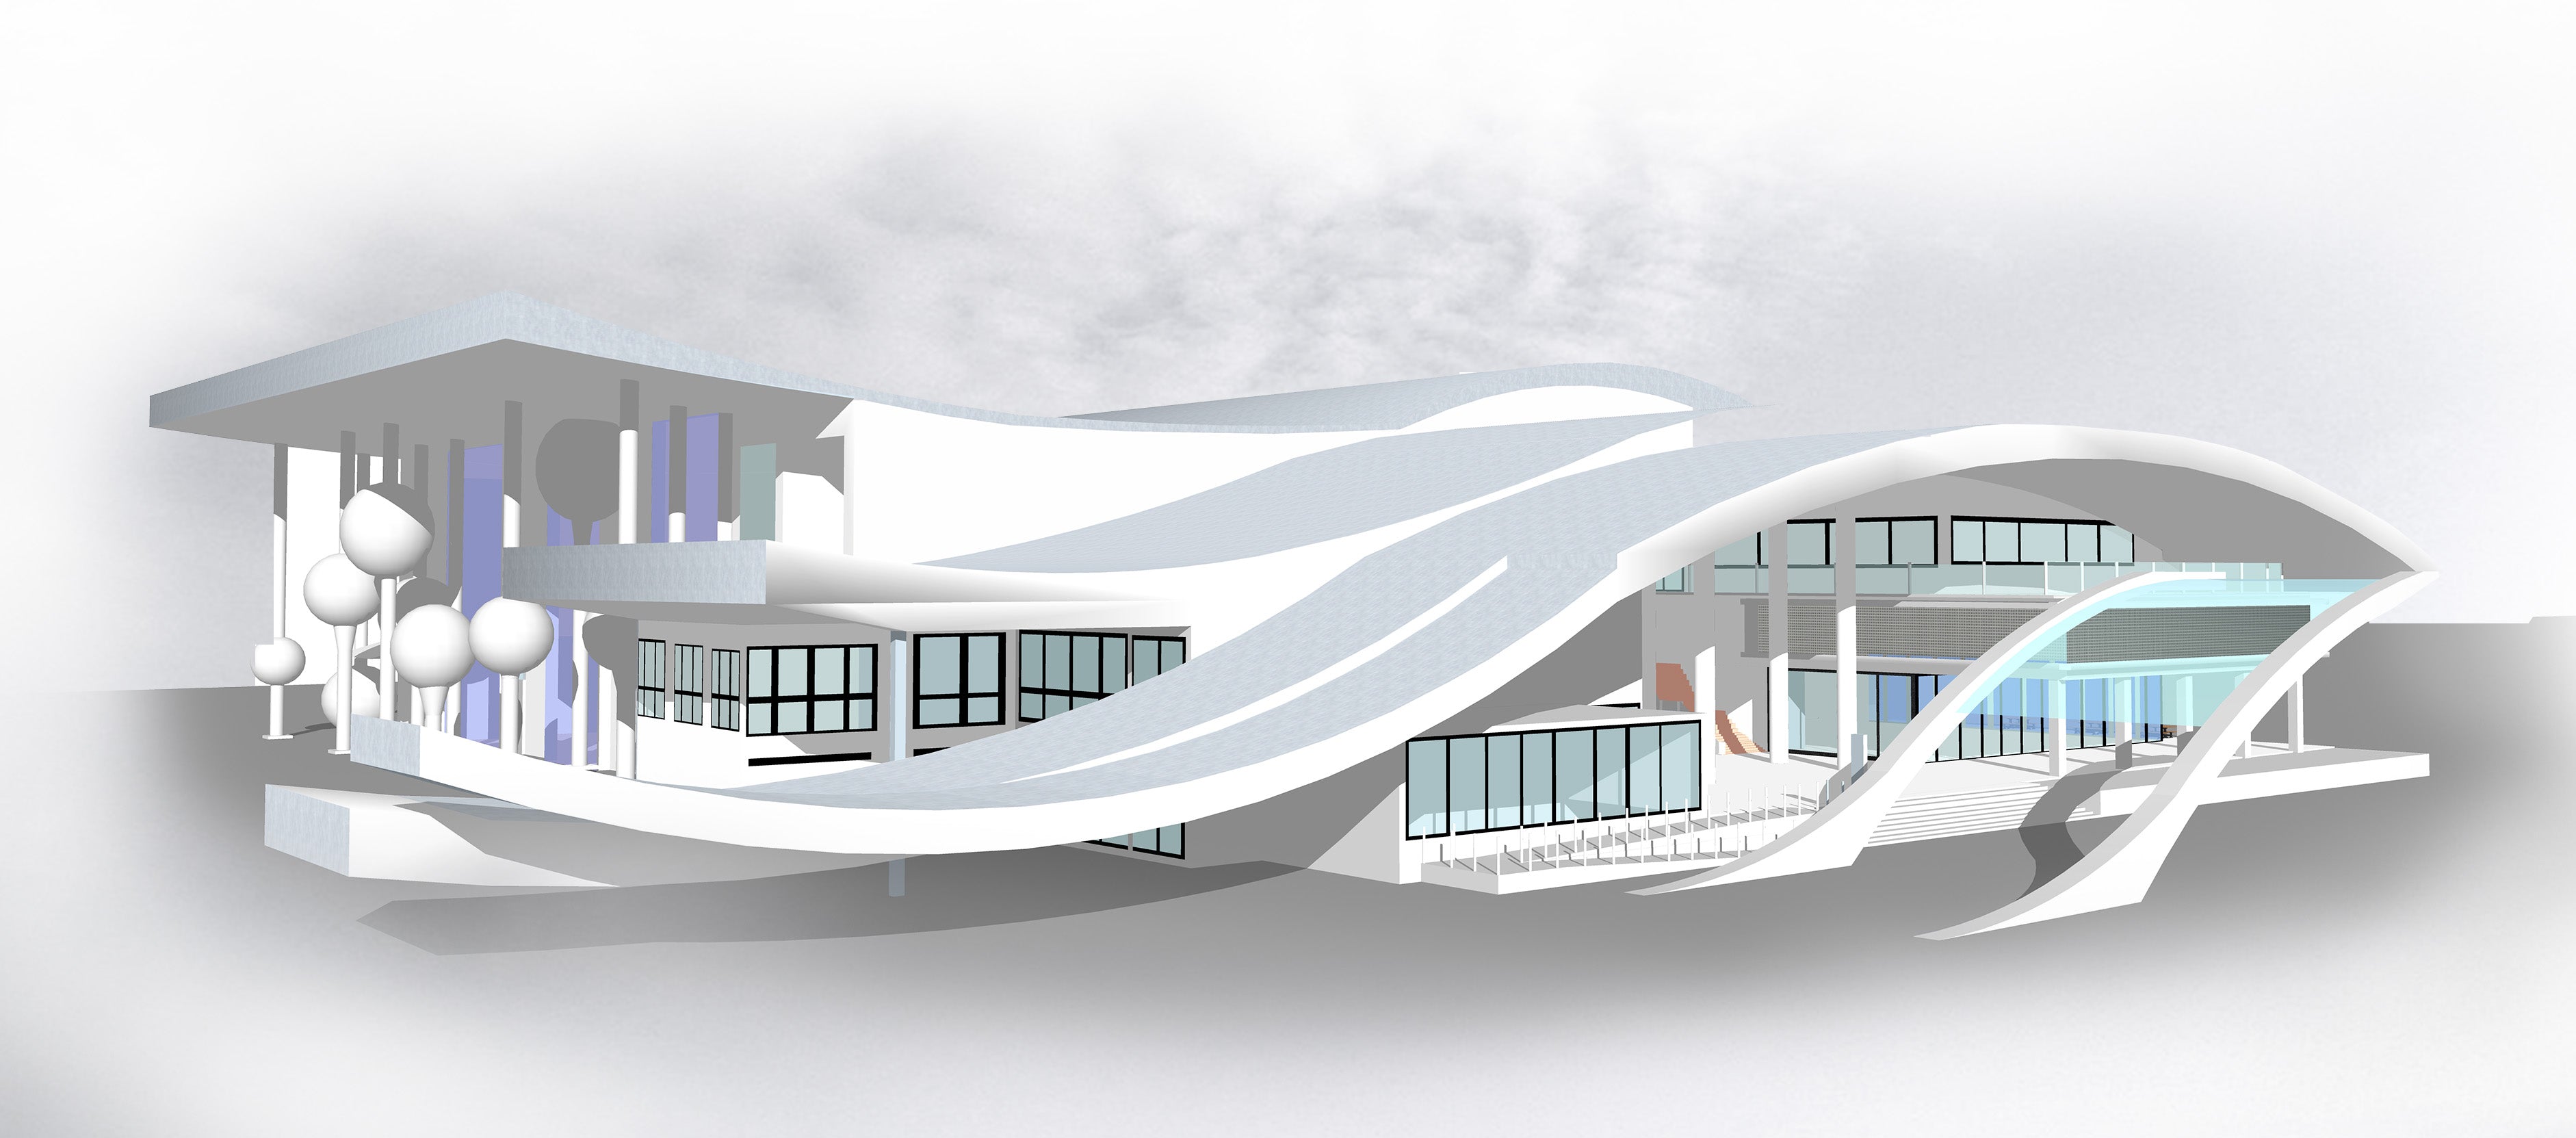 💎【Sketchup Architecture 3D Projects】Curve Polygon Gallery ,Art Museum Sketchup 3D Models